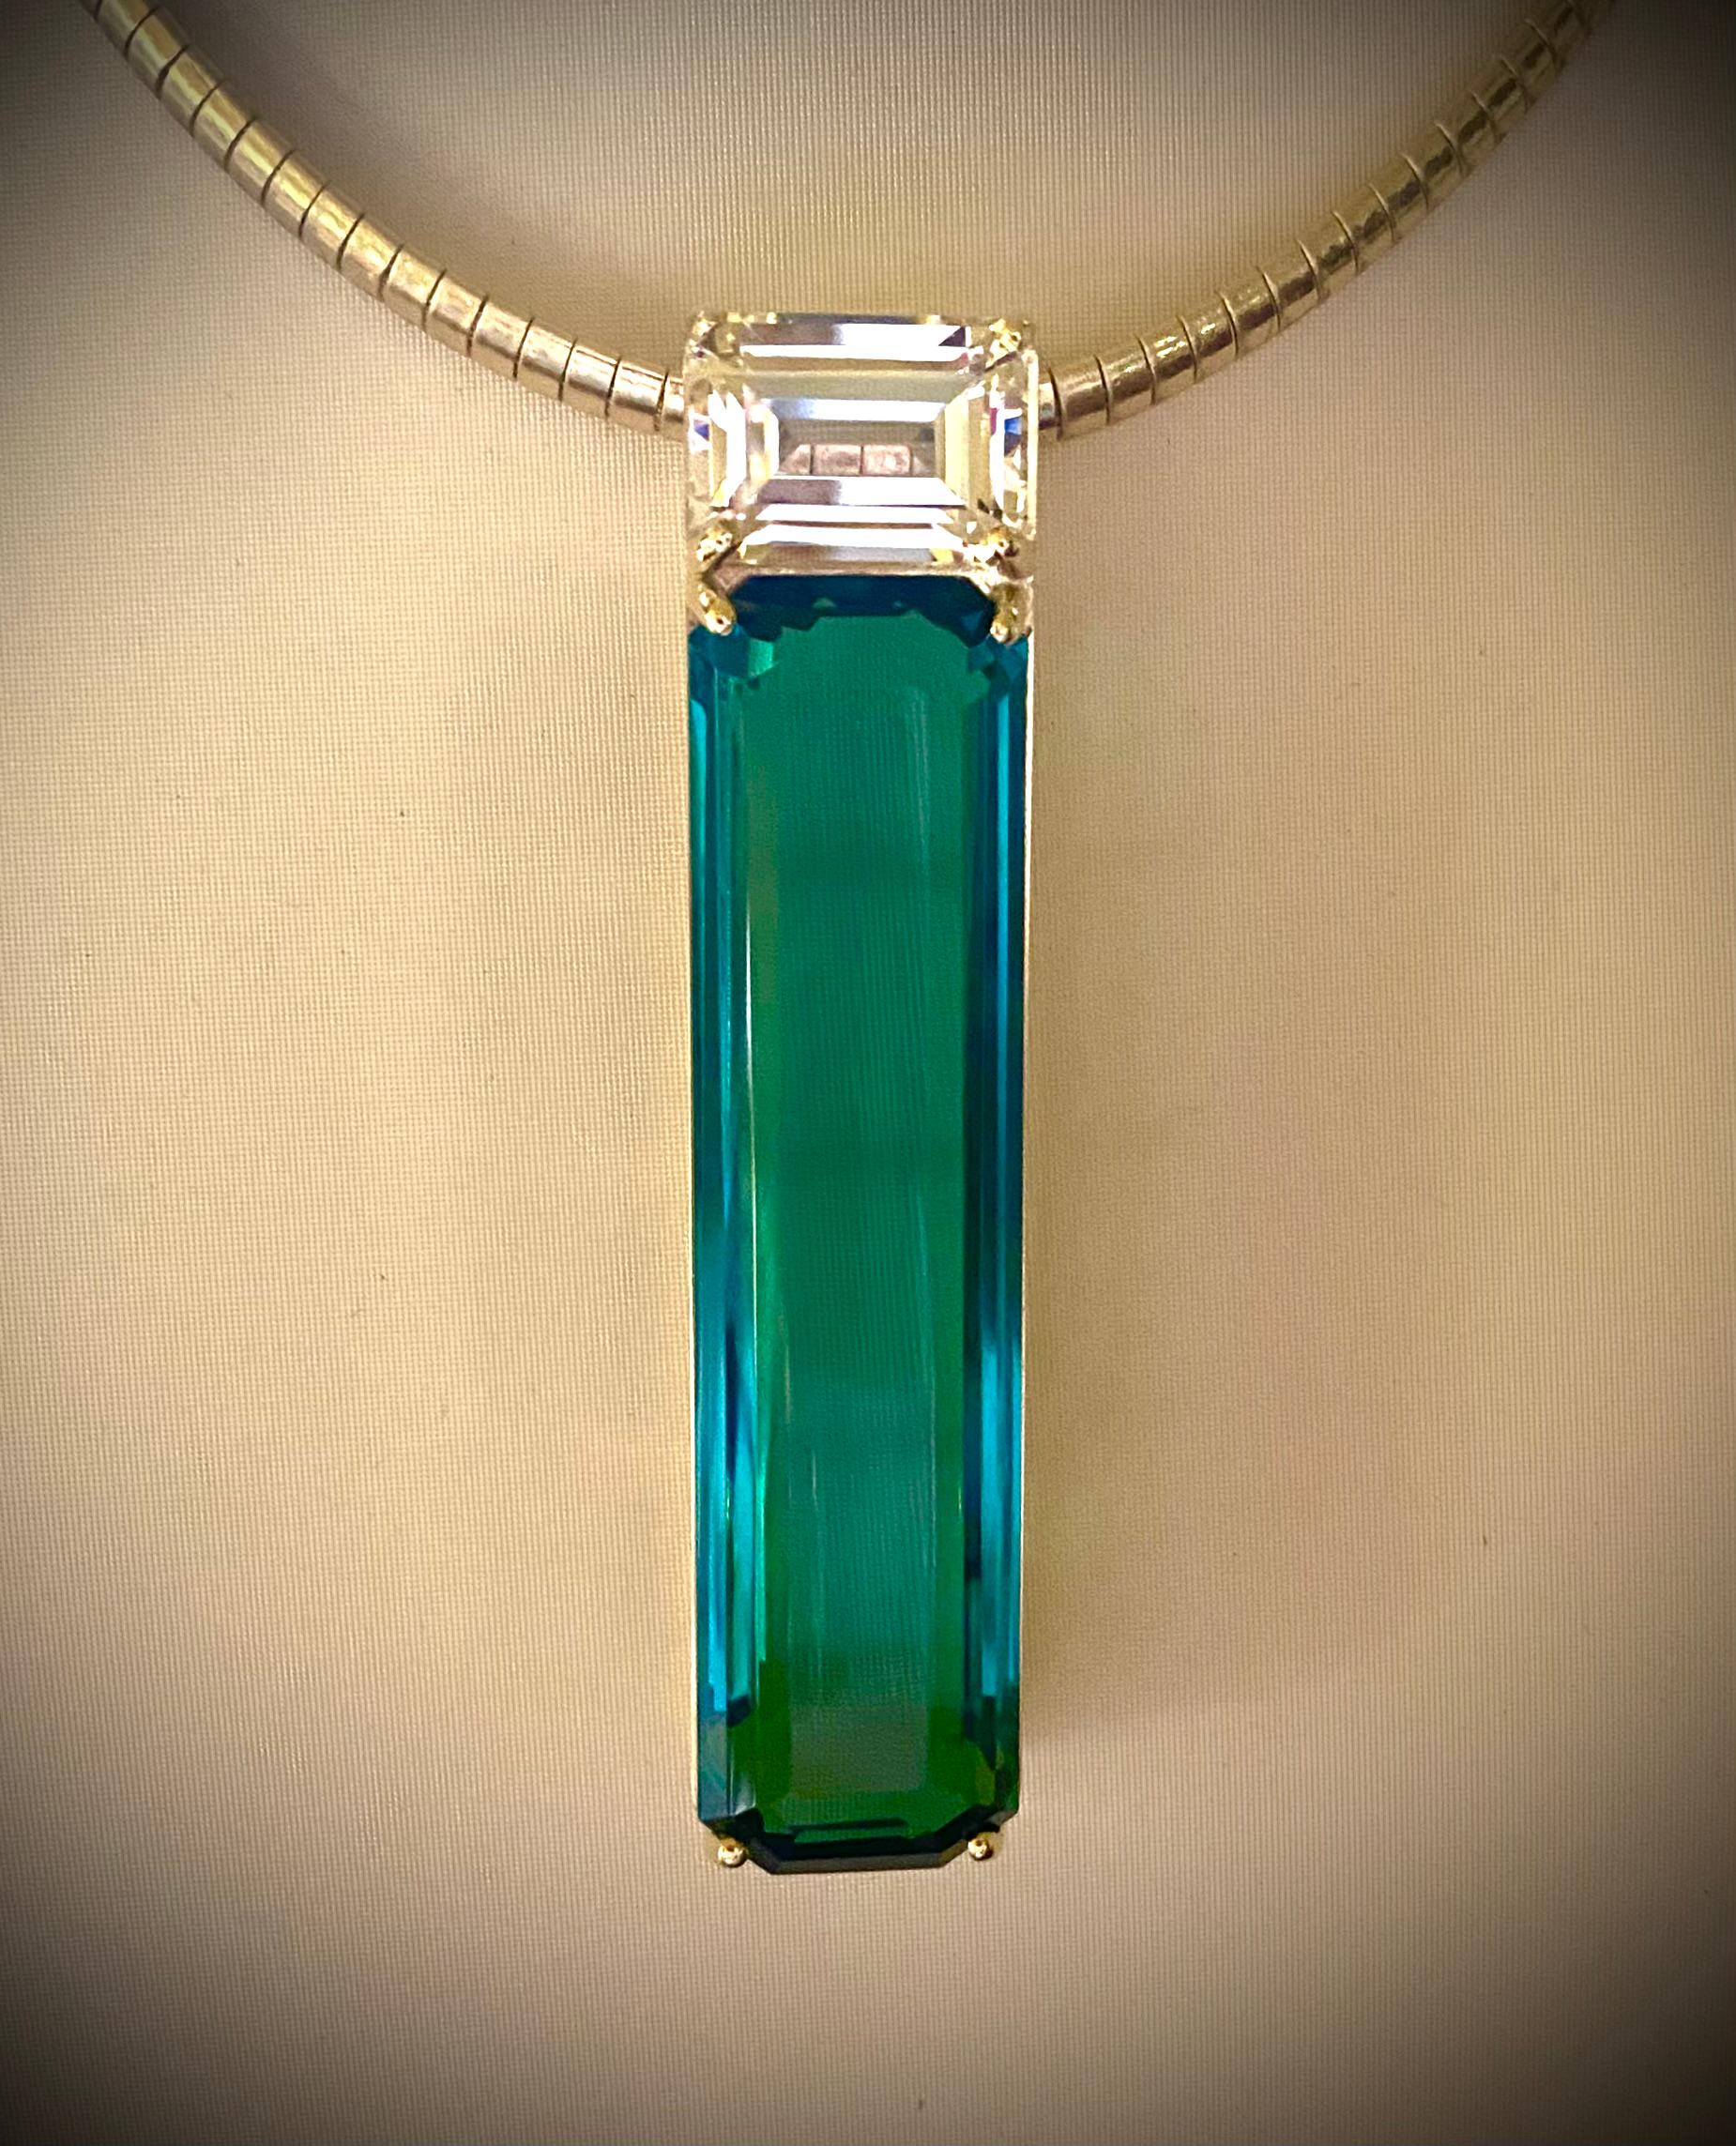 Topaz and sapphire are paired in this dramatic plinth pendant.  The highly unusual blue/green topaz (origin: Brazil) weighs 83 carats.  It has been expertly cut and polished into an elongated step cut.  The gem is exceptionally brilliant.  The topaz